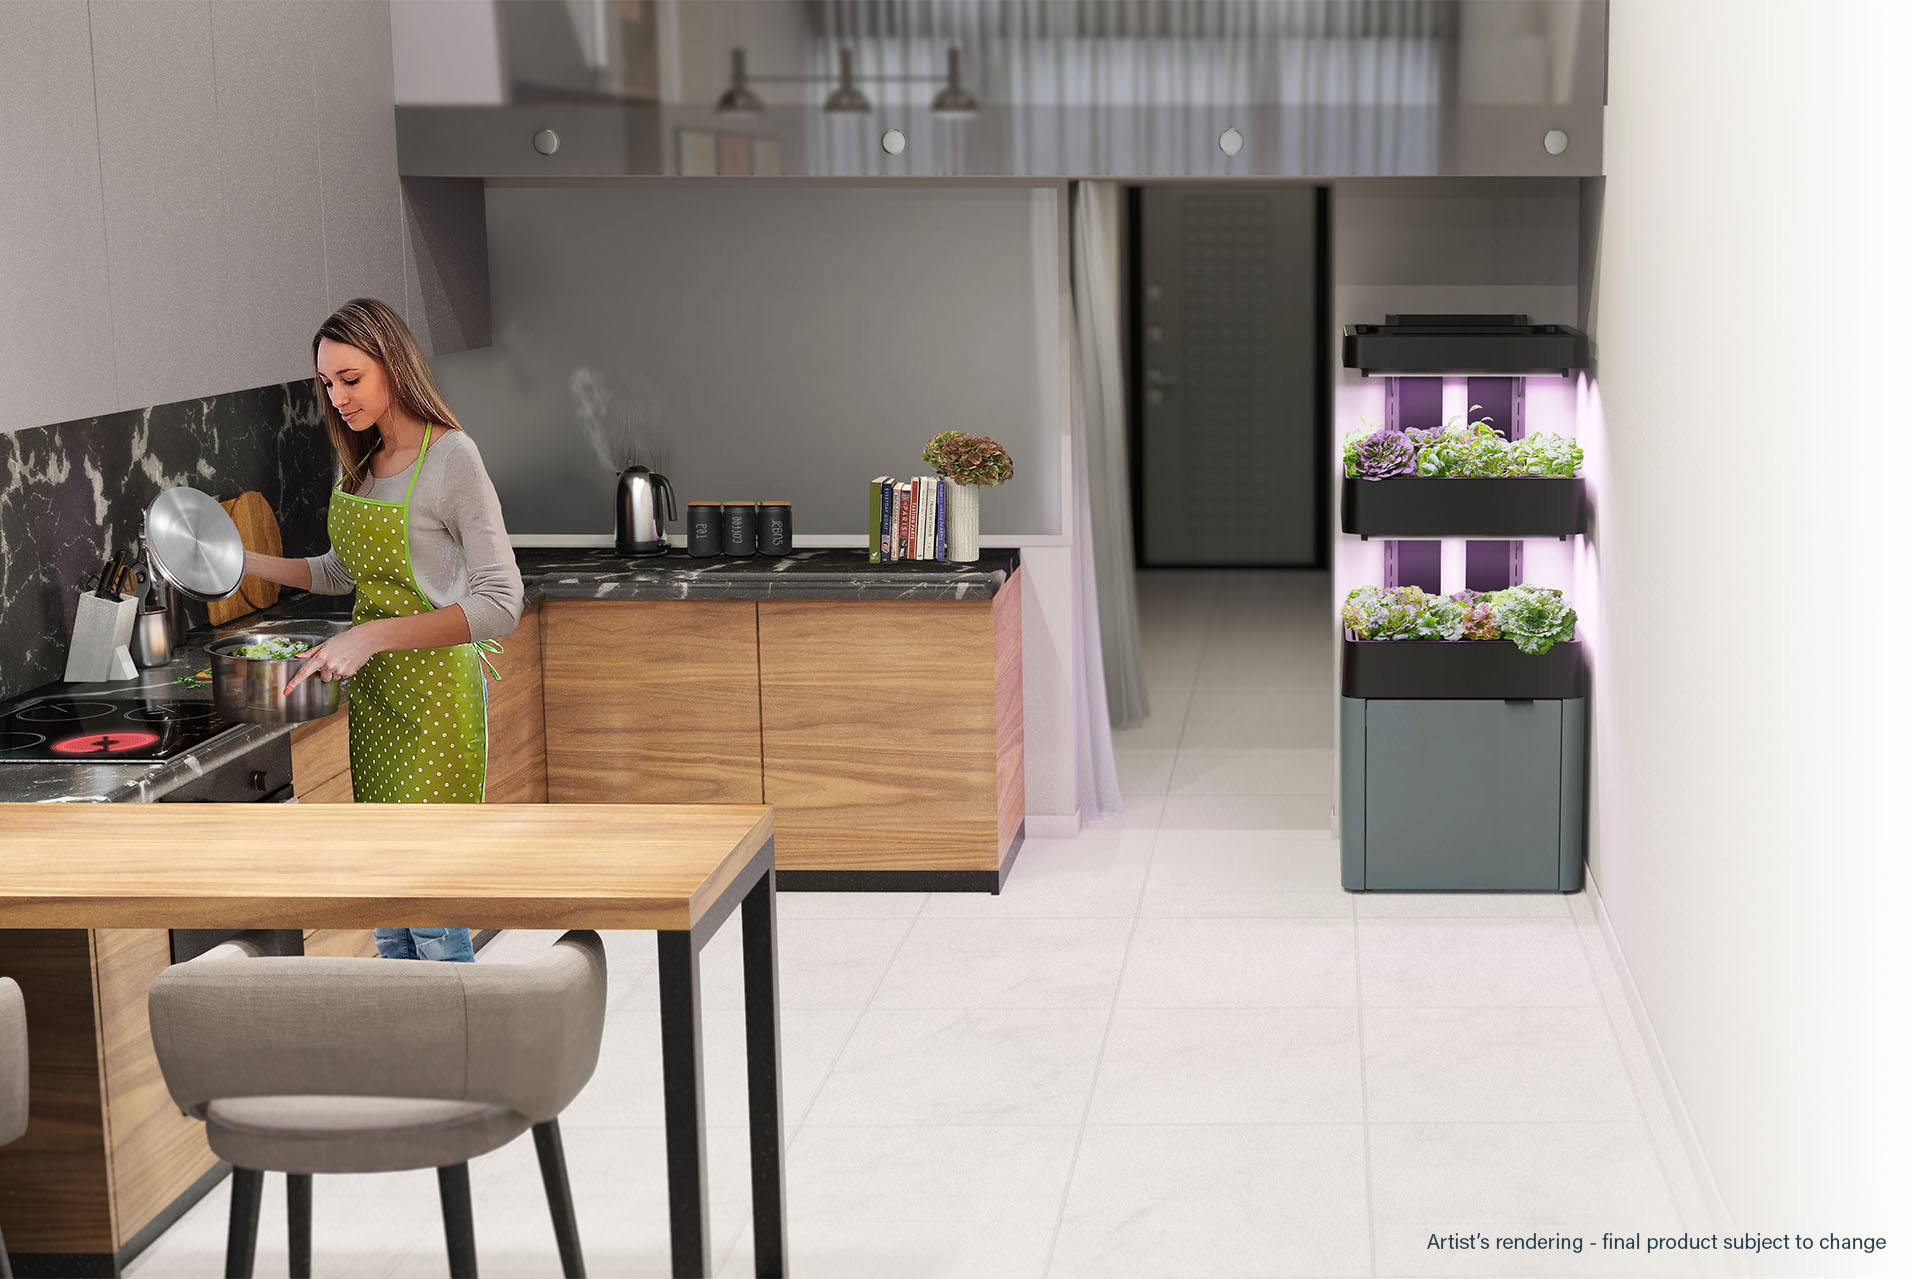 Terrace Home in a home kitchen environment with woman standing at stove cooking - disclaimer "Artist's rendering - final product subject to change"